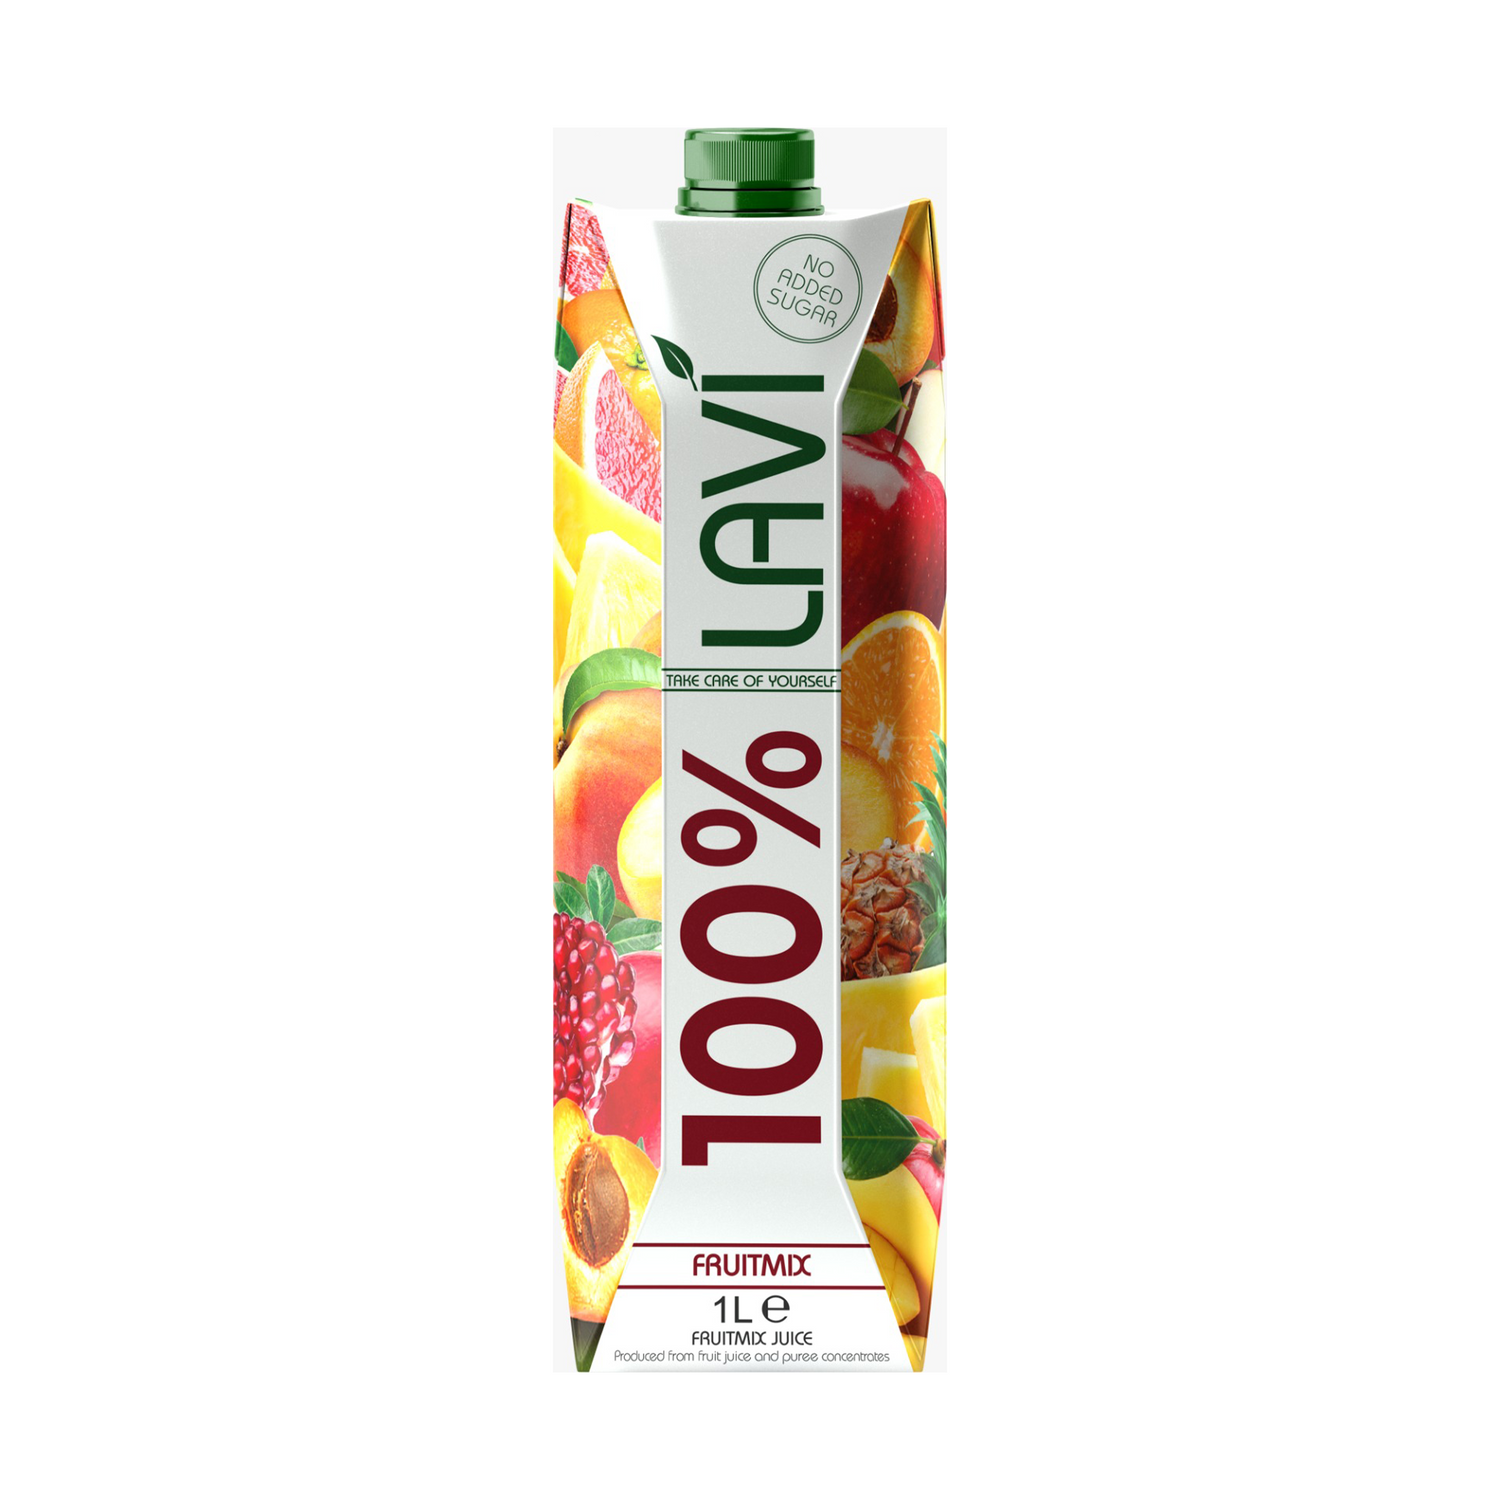 [Free shipping] Dogal Support Package No.4: 6 kinds of Fruits Juice (2 bottles for each flavor)